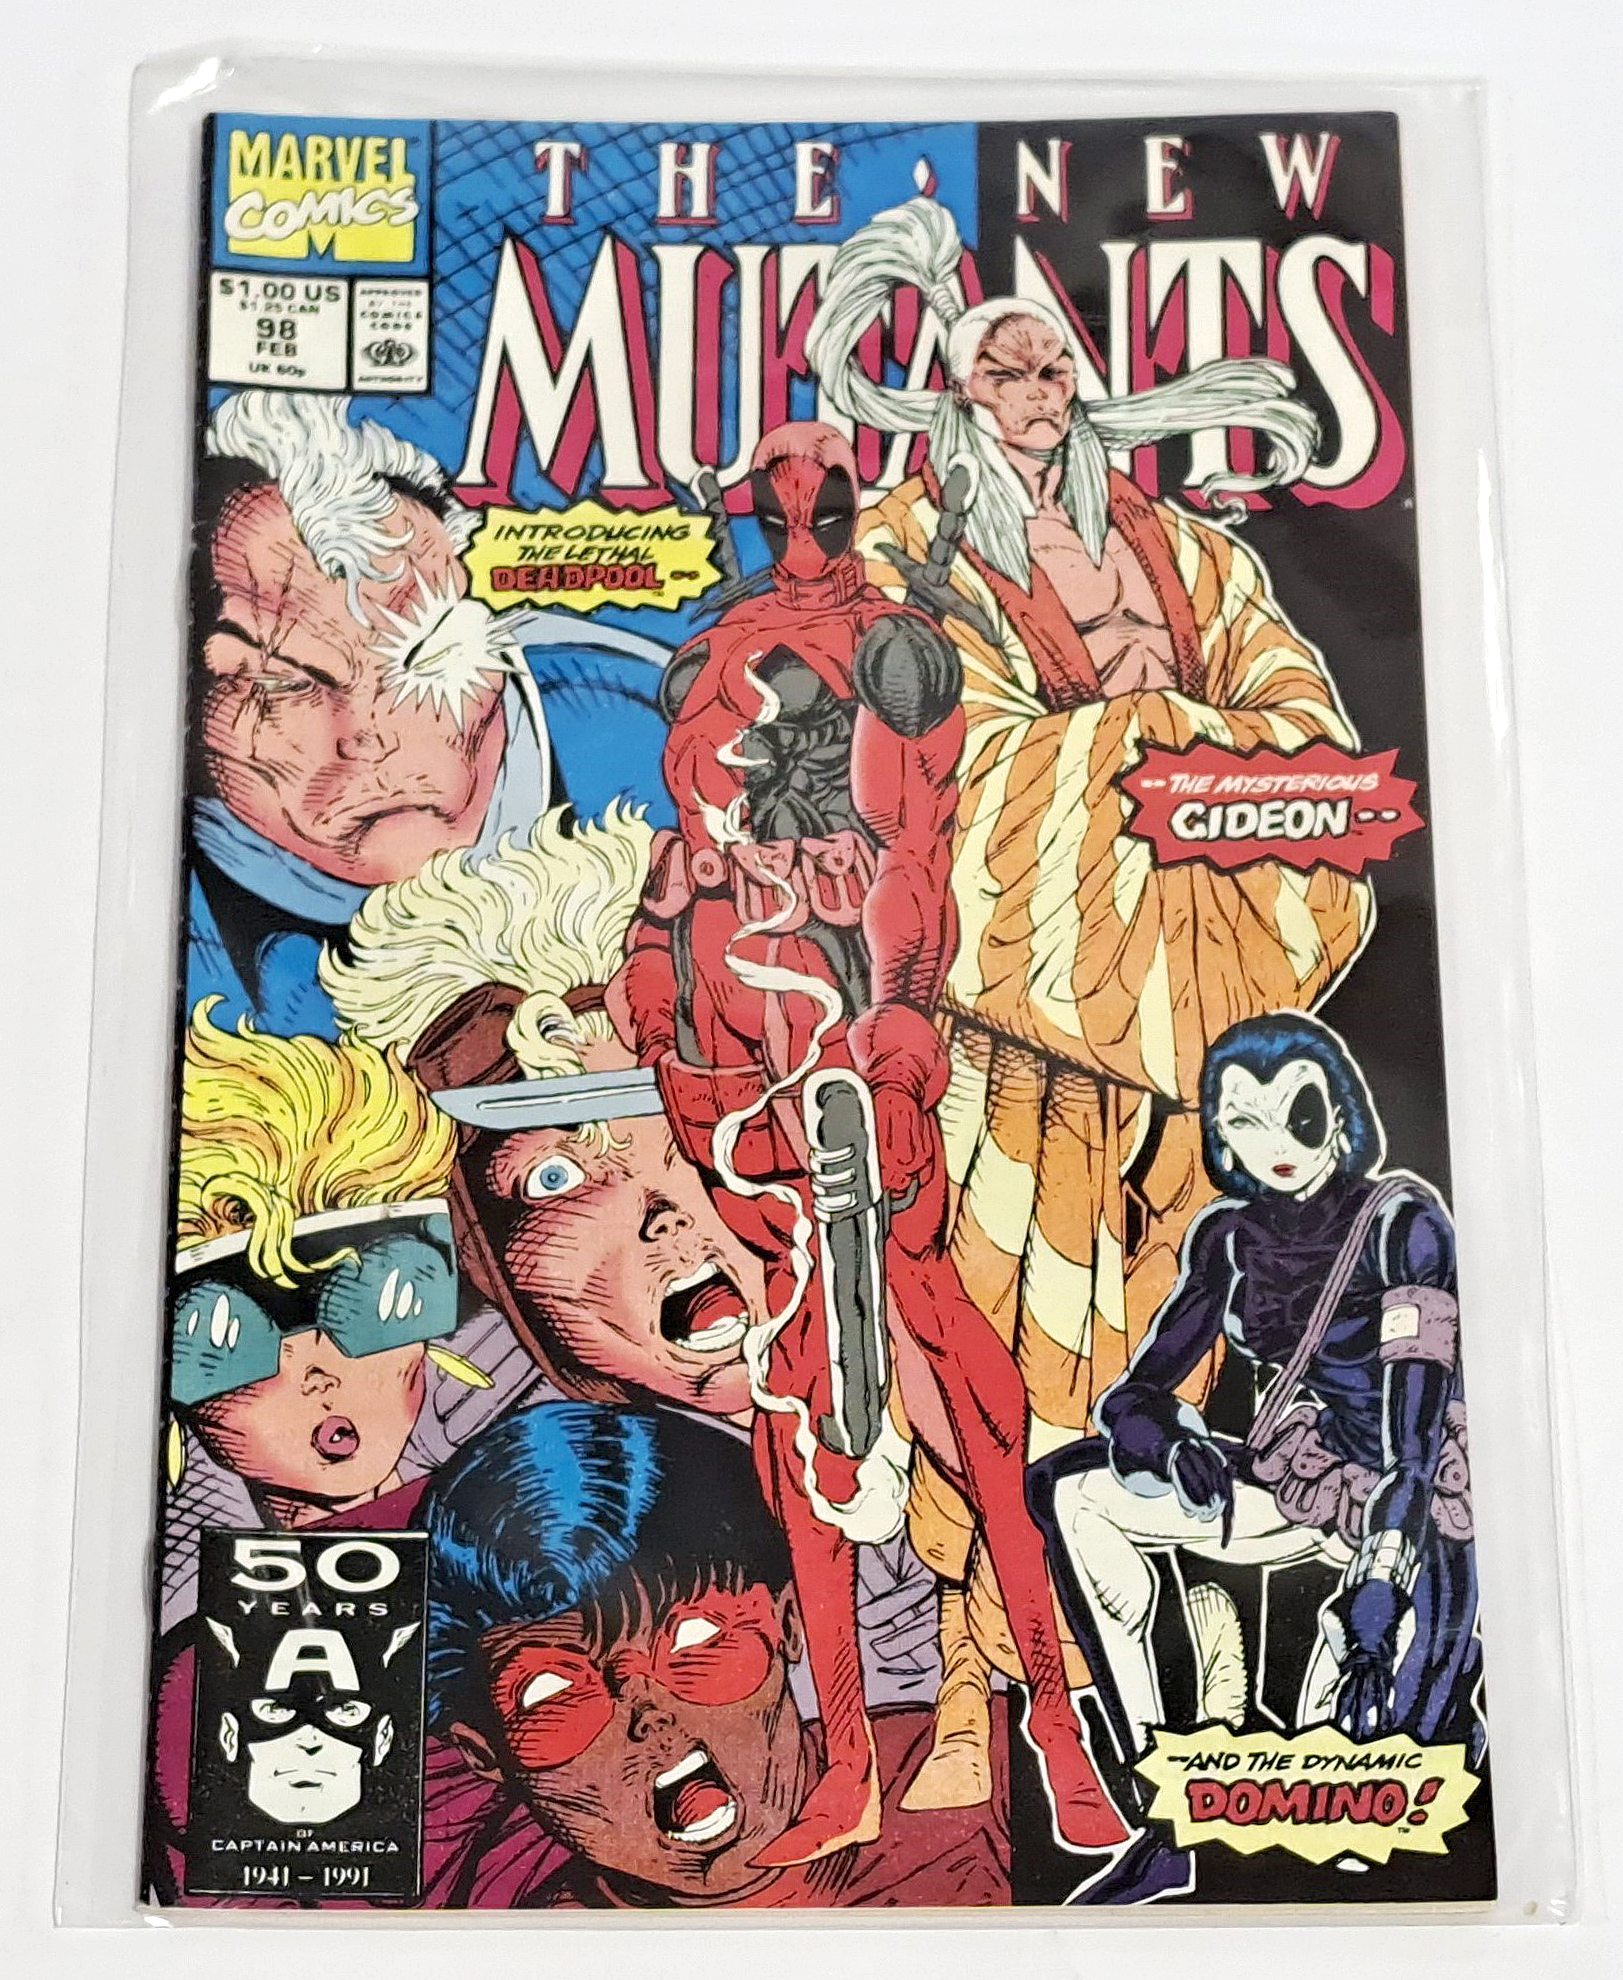 Marvel Comics The New Mutants #98, First Appearance of Deadpool